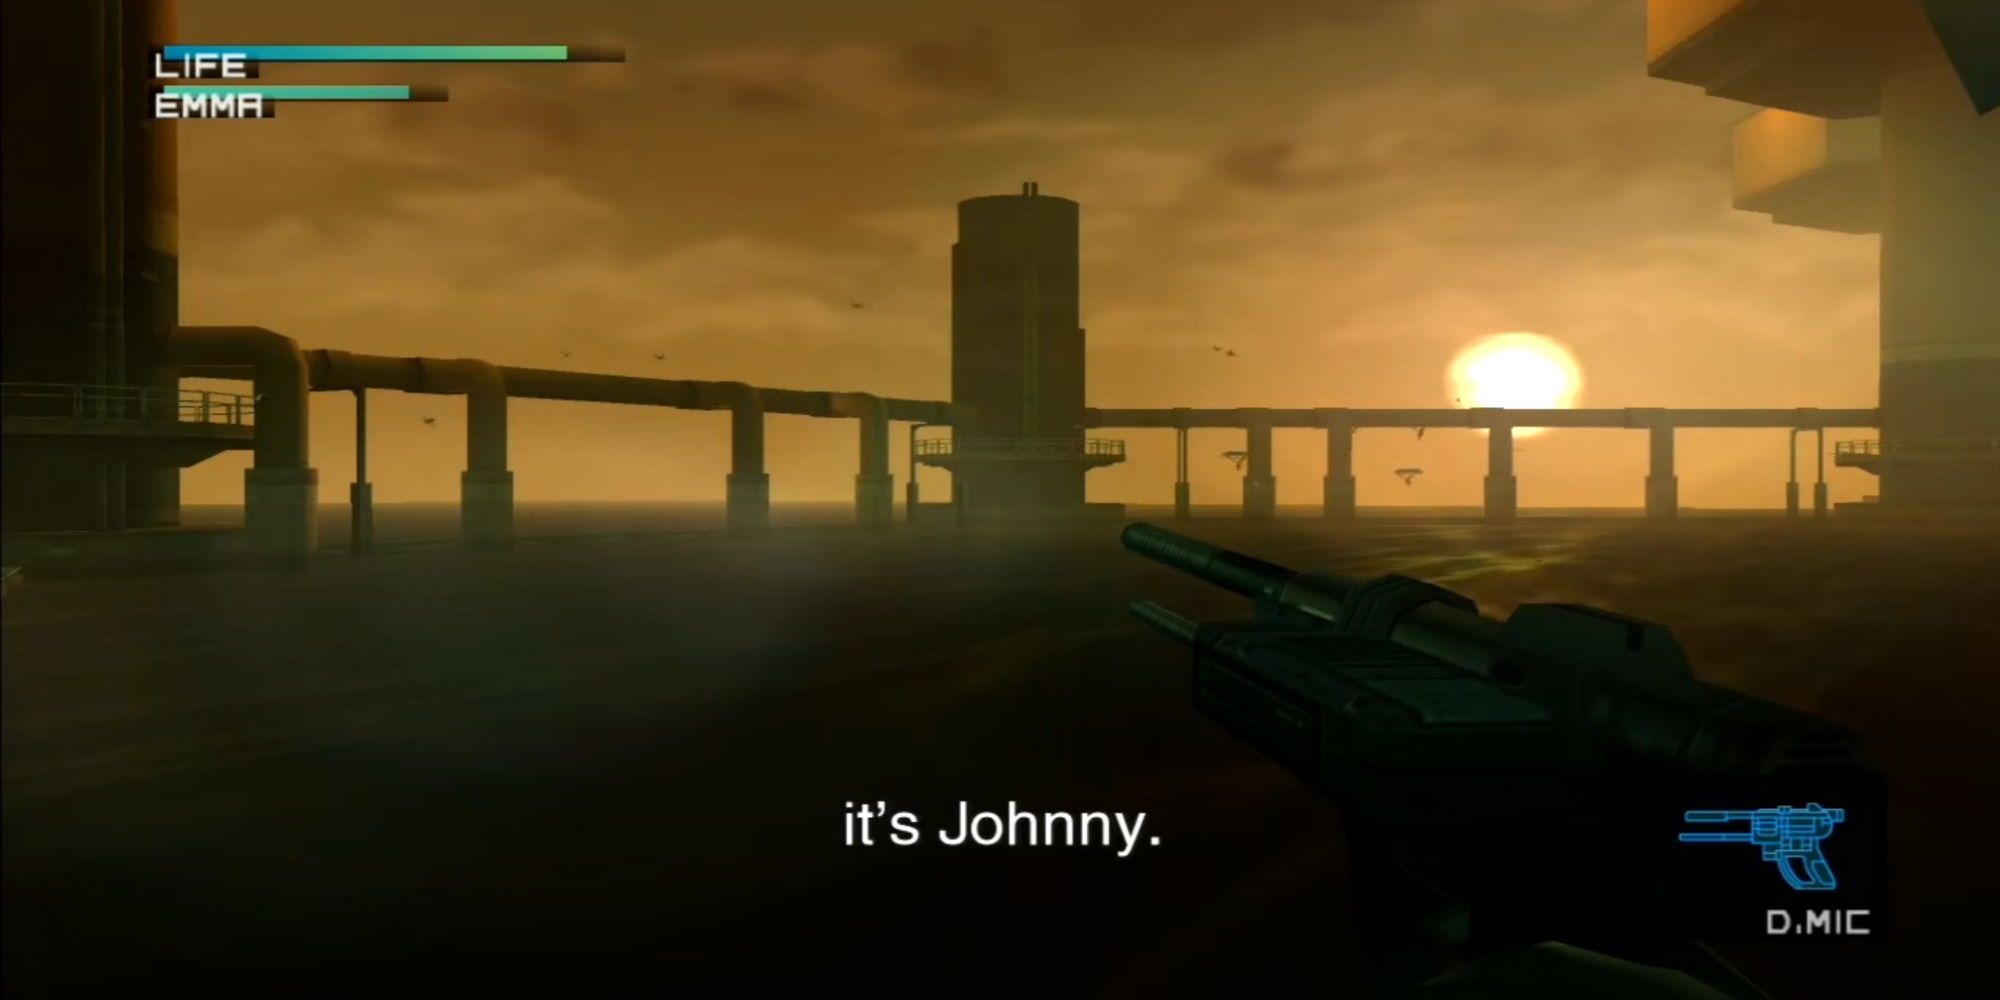 Raiden aiming a Directional Microphone towards a tower with Johnny speaking to Emma from it